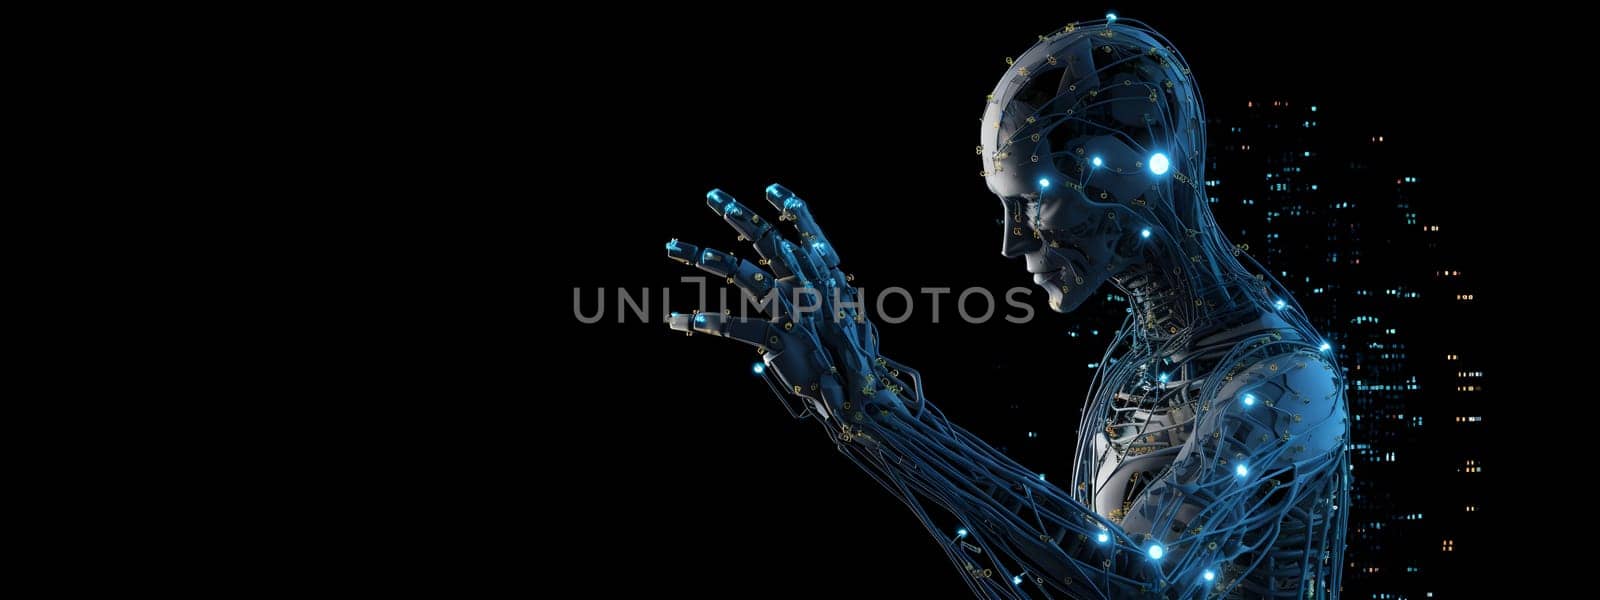 anthropomorphic humanoid robot reaches out by hand on black background, neural network generated art by z1b